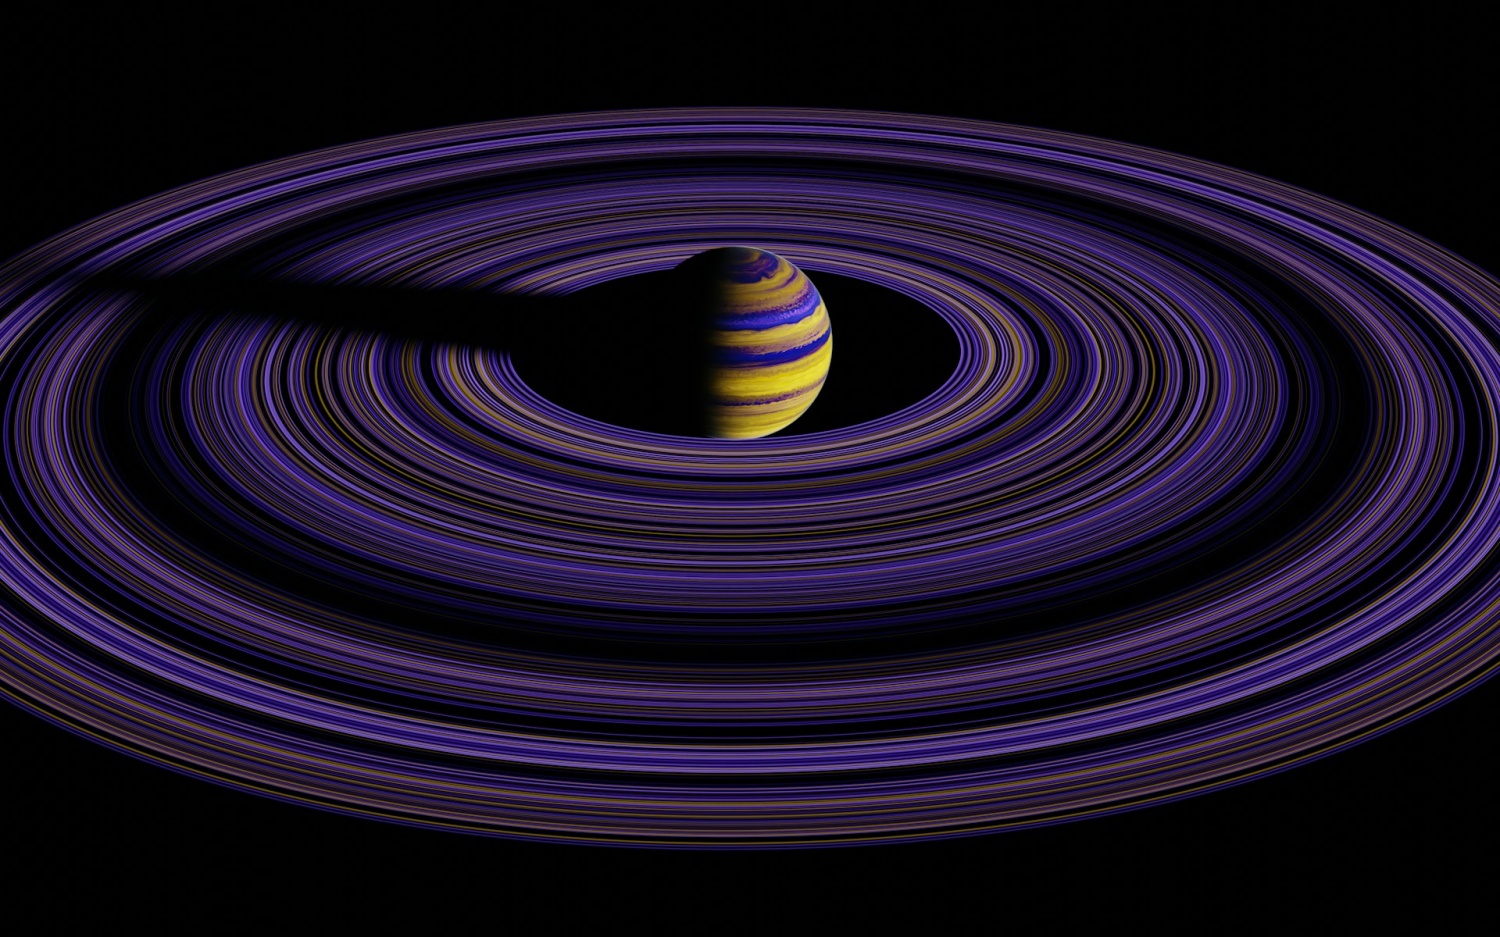 Gravitational Wave Detection: How Earth and Jupiter Could Unravel Cosmic Mysteries